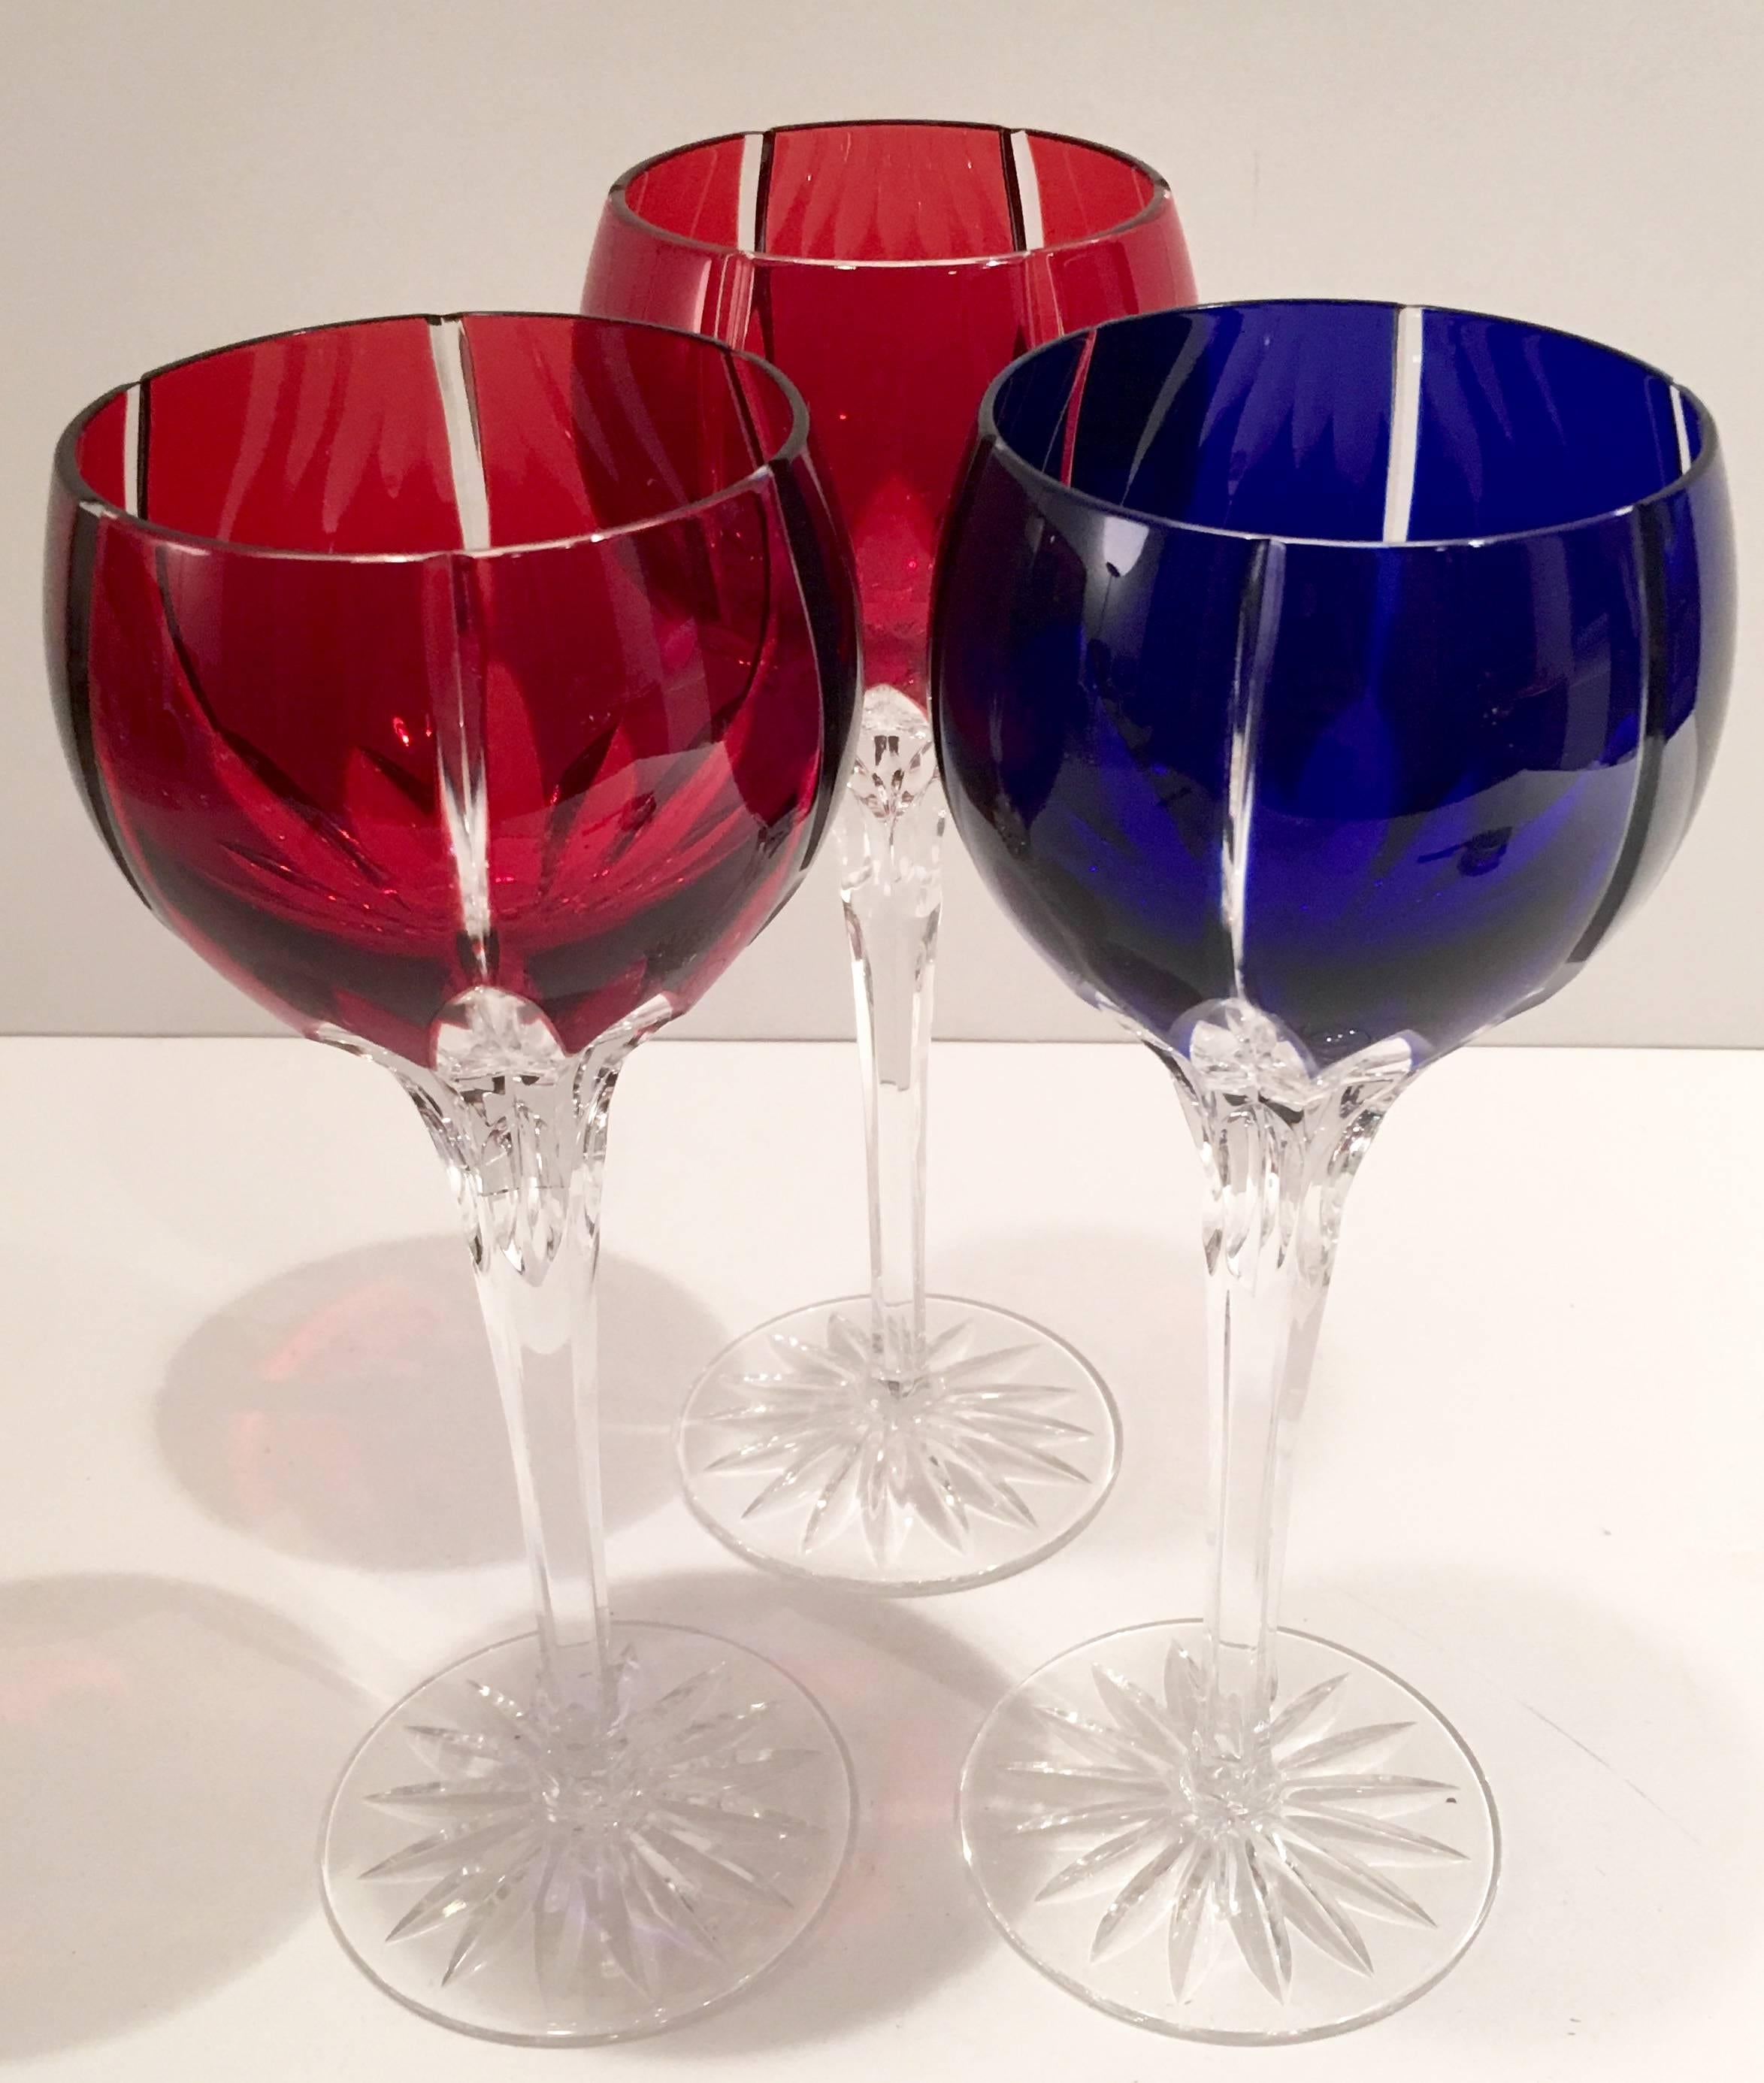 Classic set of three bohemia cut to clear crystal stem glasses. Set includes two ruby and one cobalt colored glass.